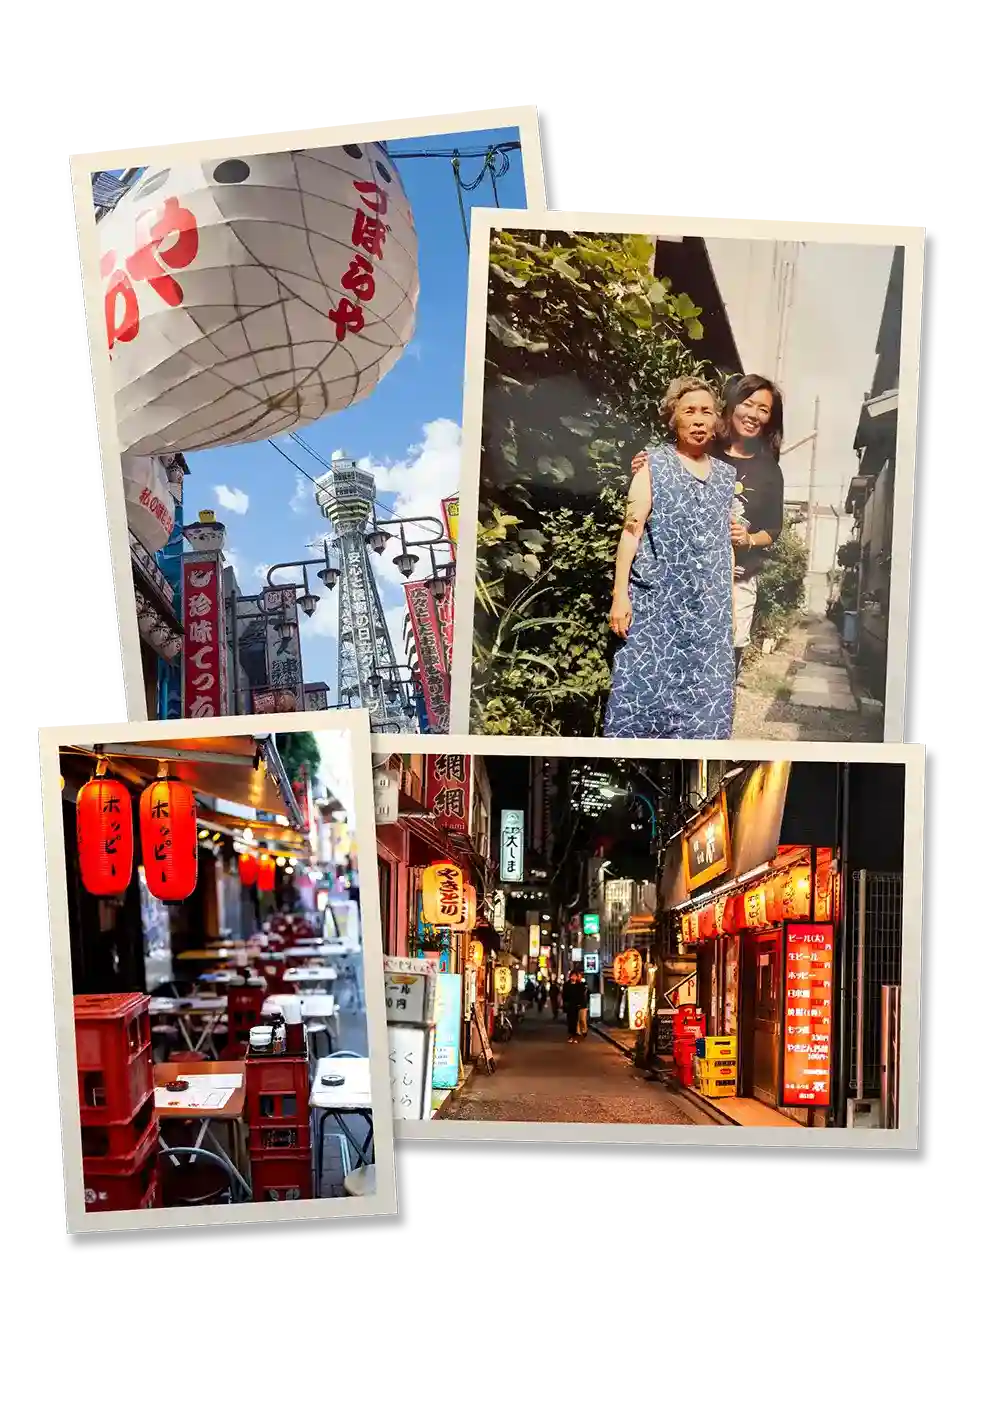 Photo montage featuring images of Japan, Mark's mother, and grandmother, illustrating the family story and inspiration behind Kiyoshi's Katsu House